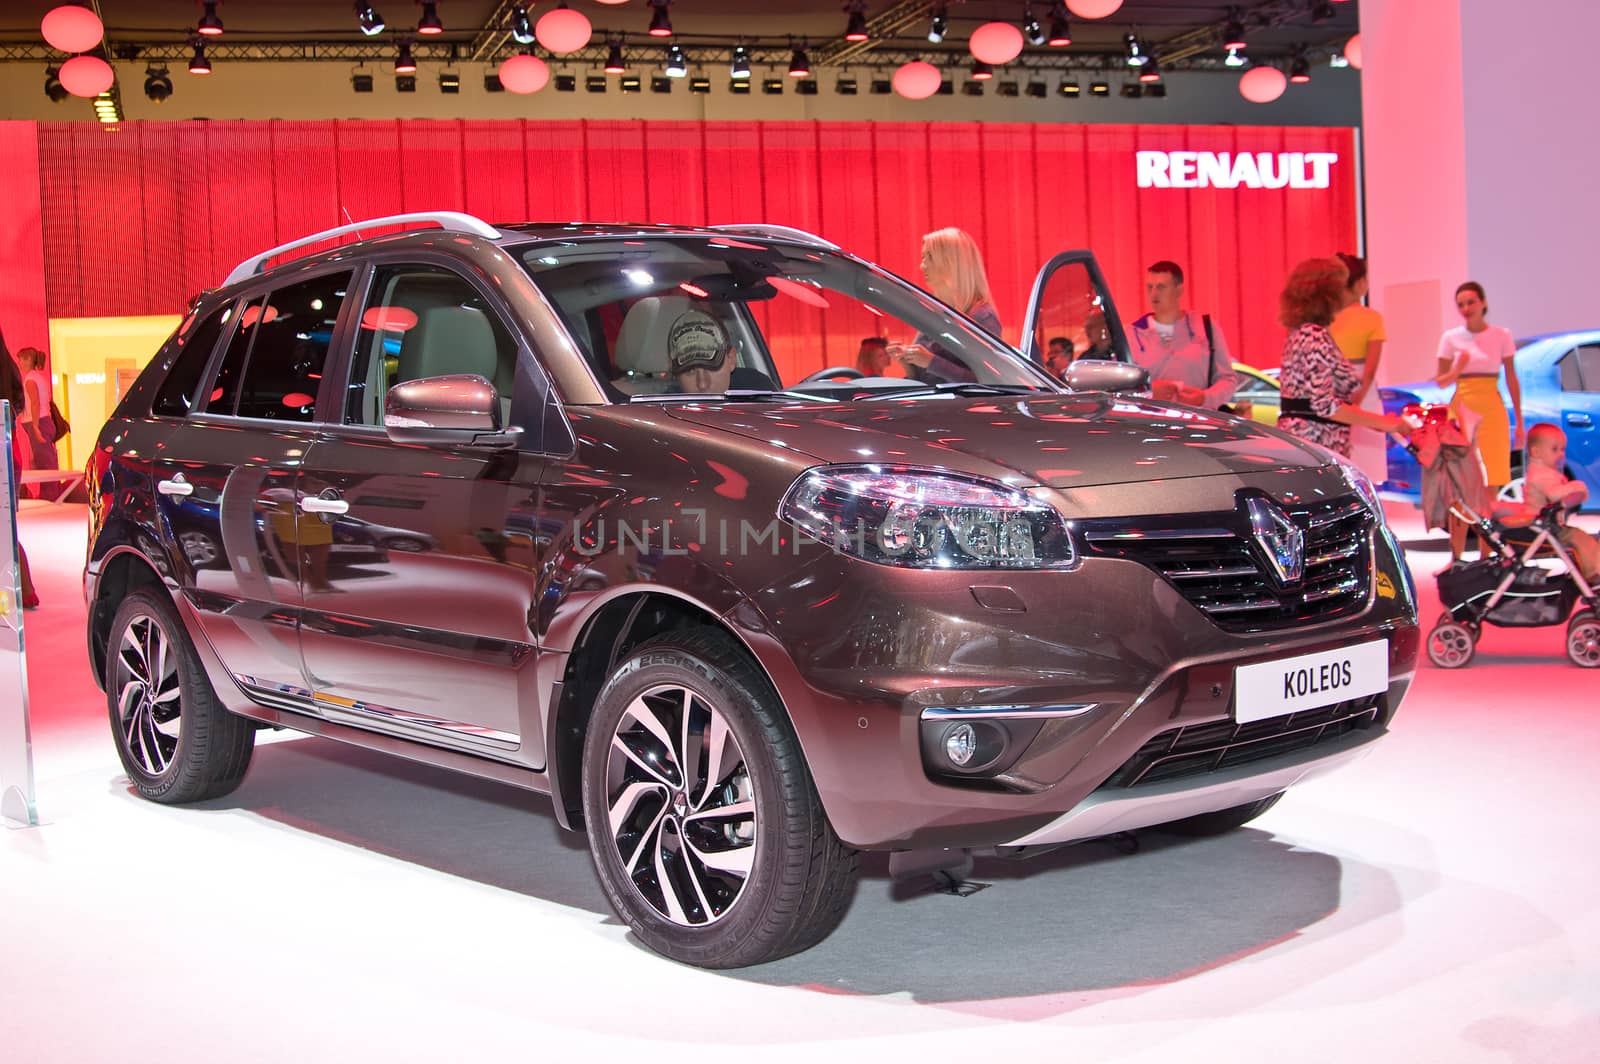 MOSCOW-SEPTEMBER 2: Renault Koleos at the Moscow International Automobile Salon on September 2, 2014 in Moscow, Russia.